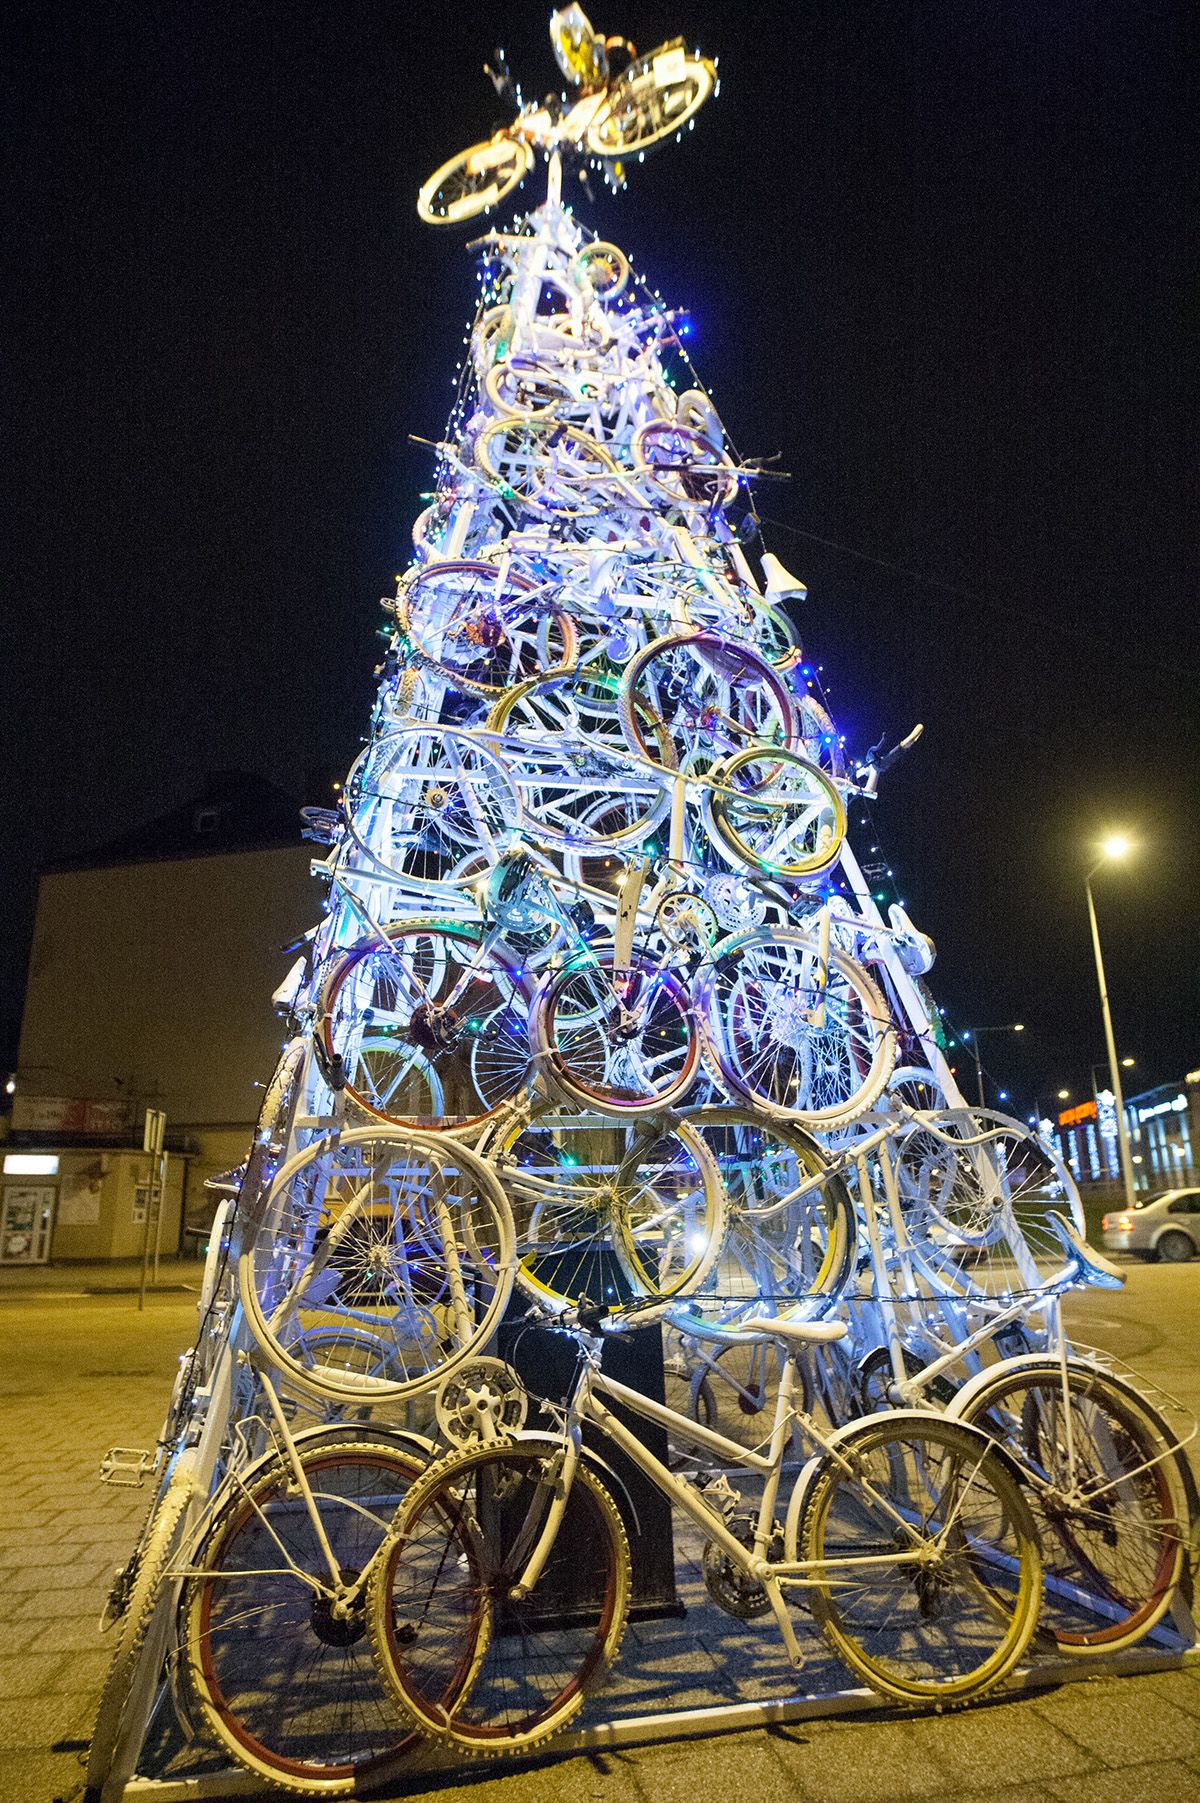 Bicycle Christmas tree in Tczew, Poland